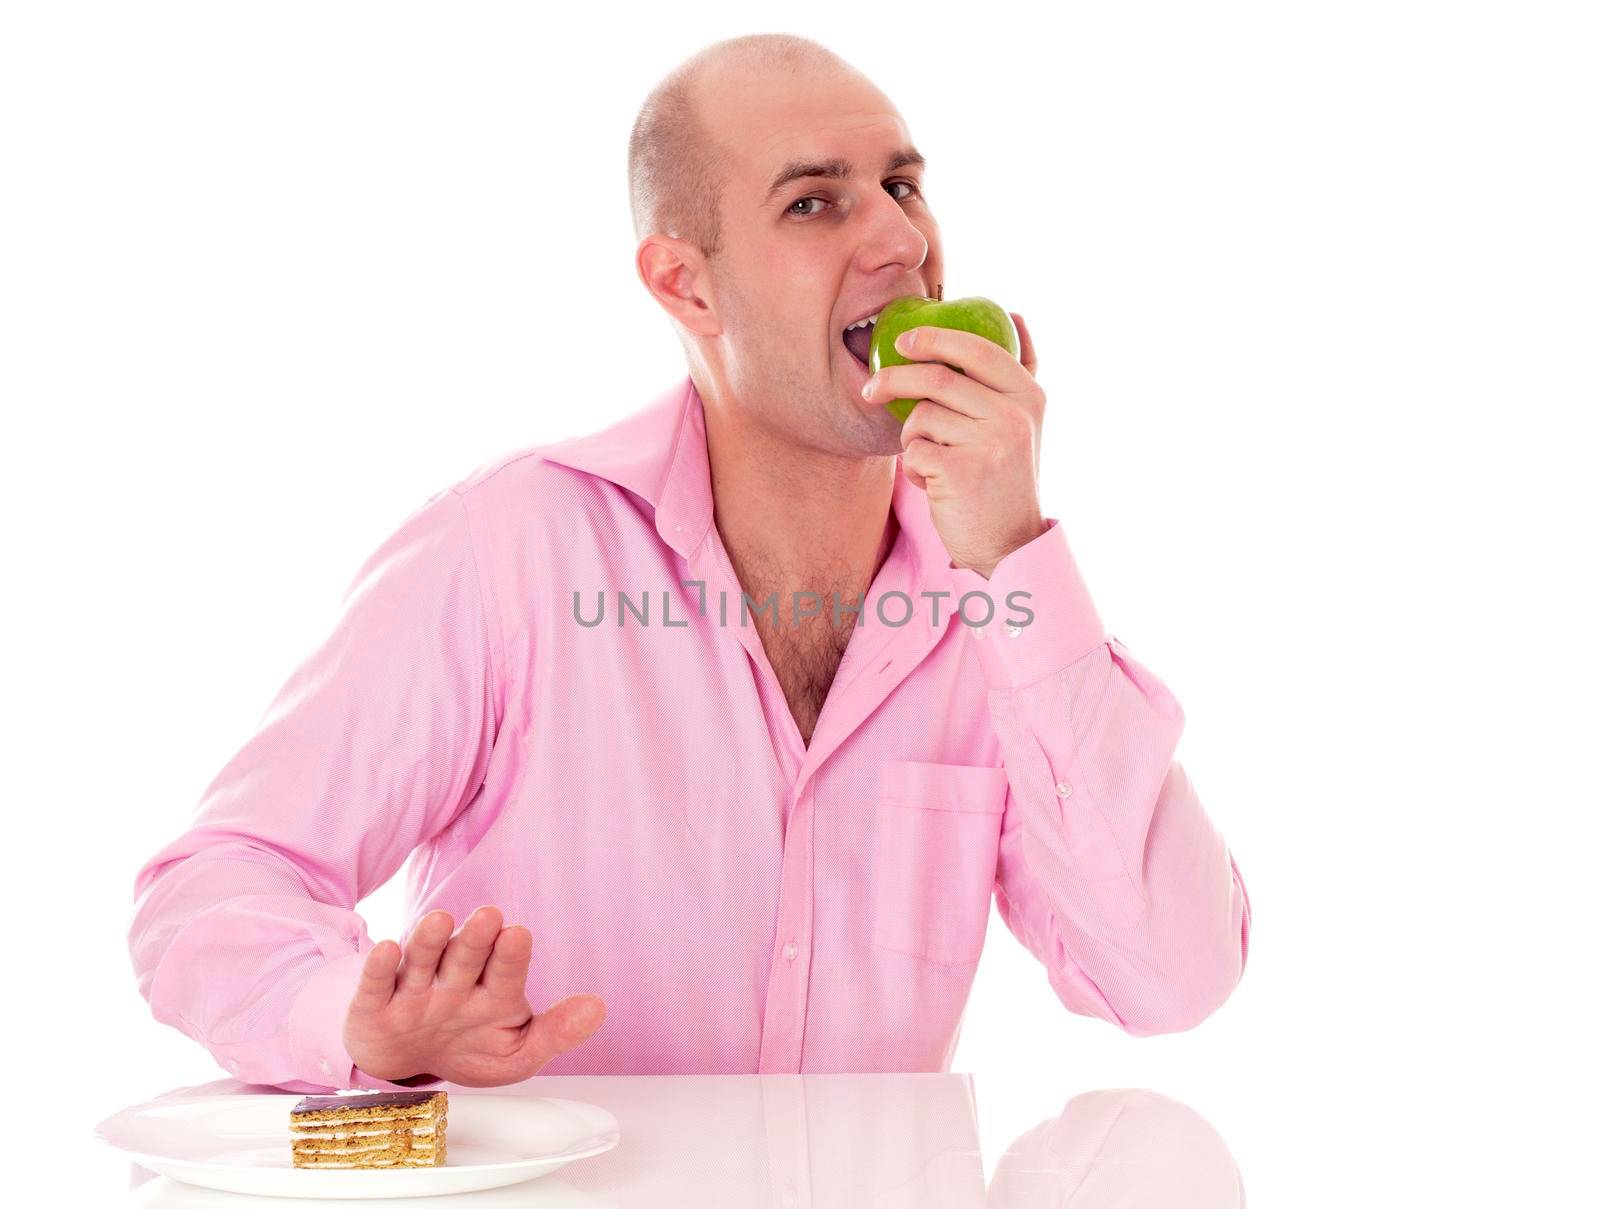 Caucasian man eating apple instead of cake, isolated on white background.